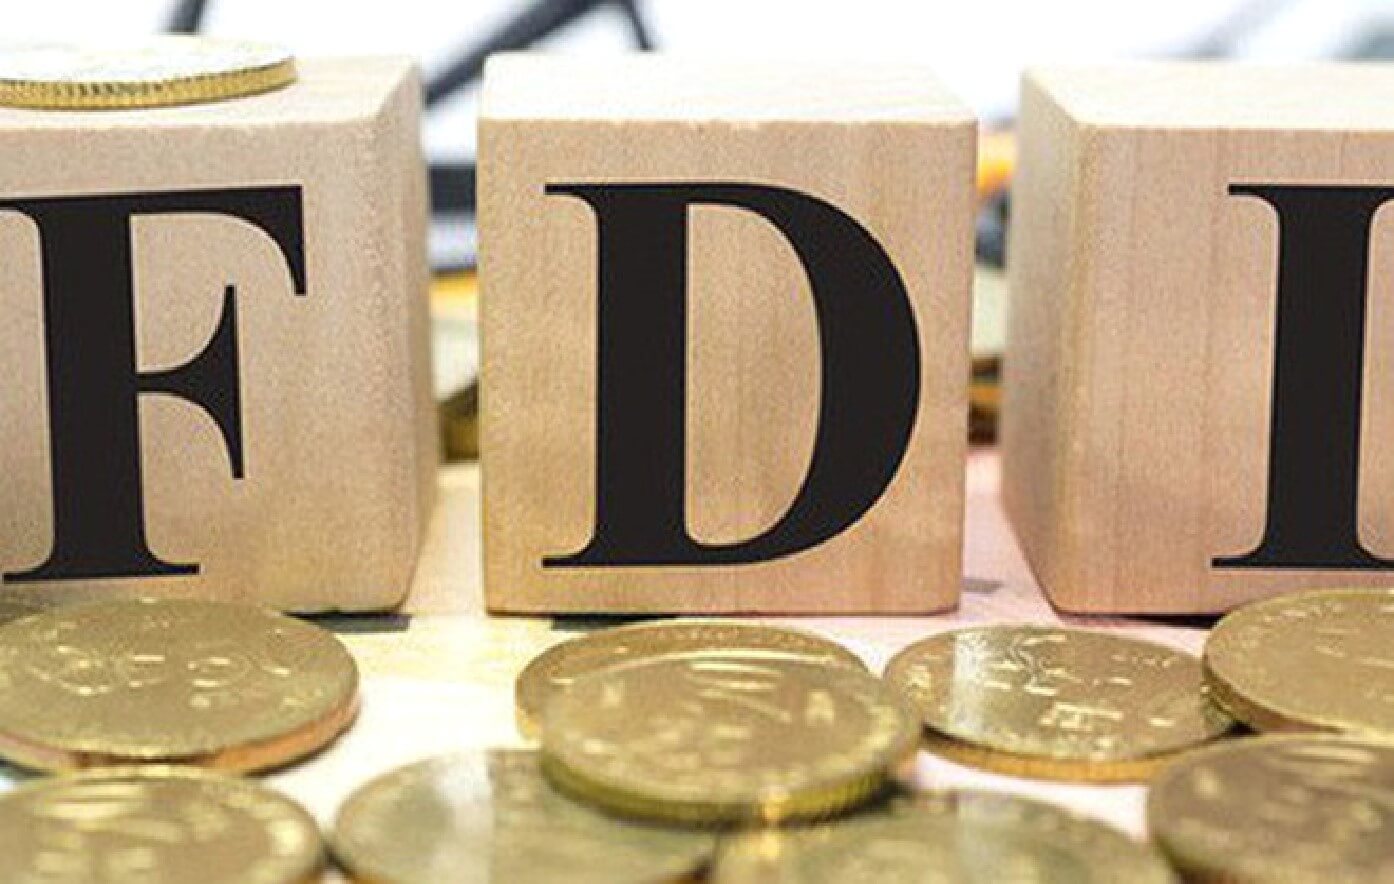 Procedures for granting licenses to import raw gold for FDI enterprises have changed since November